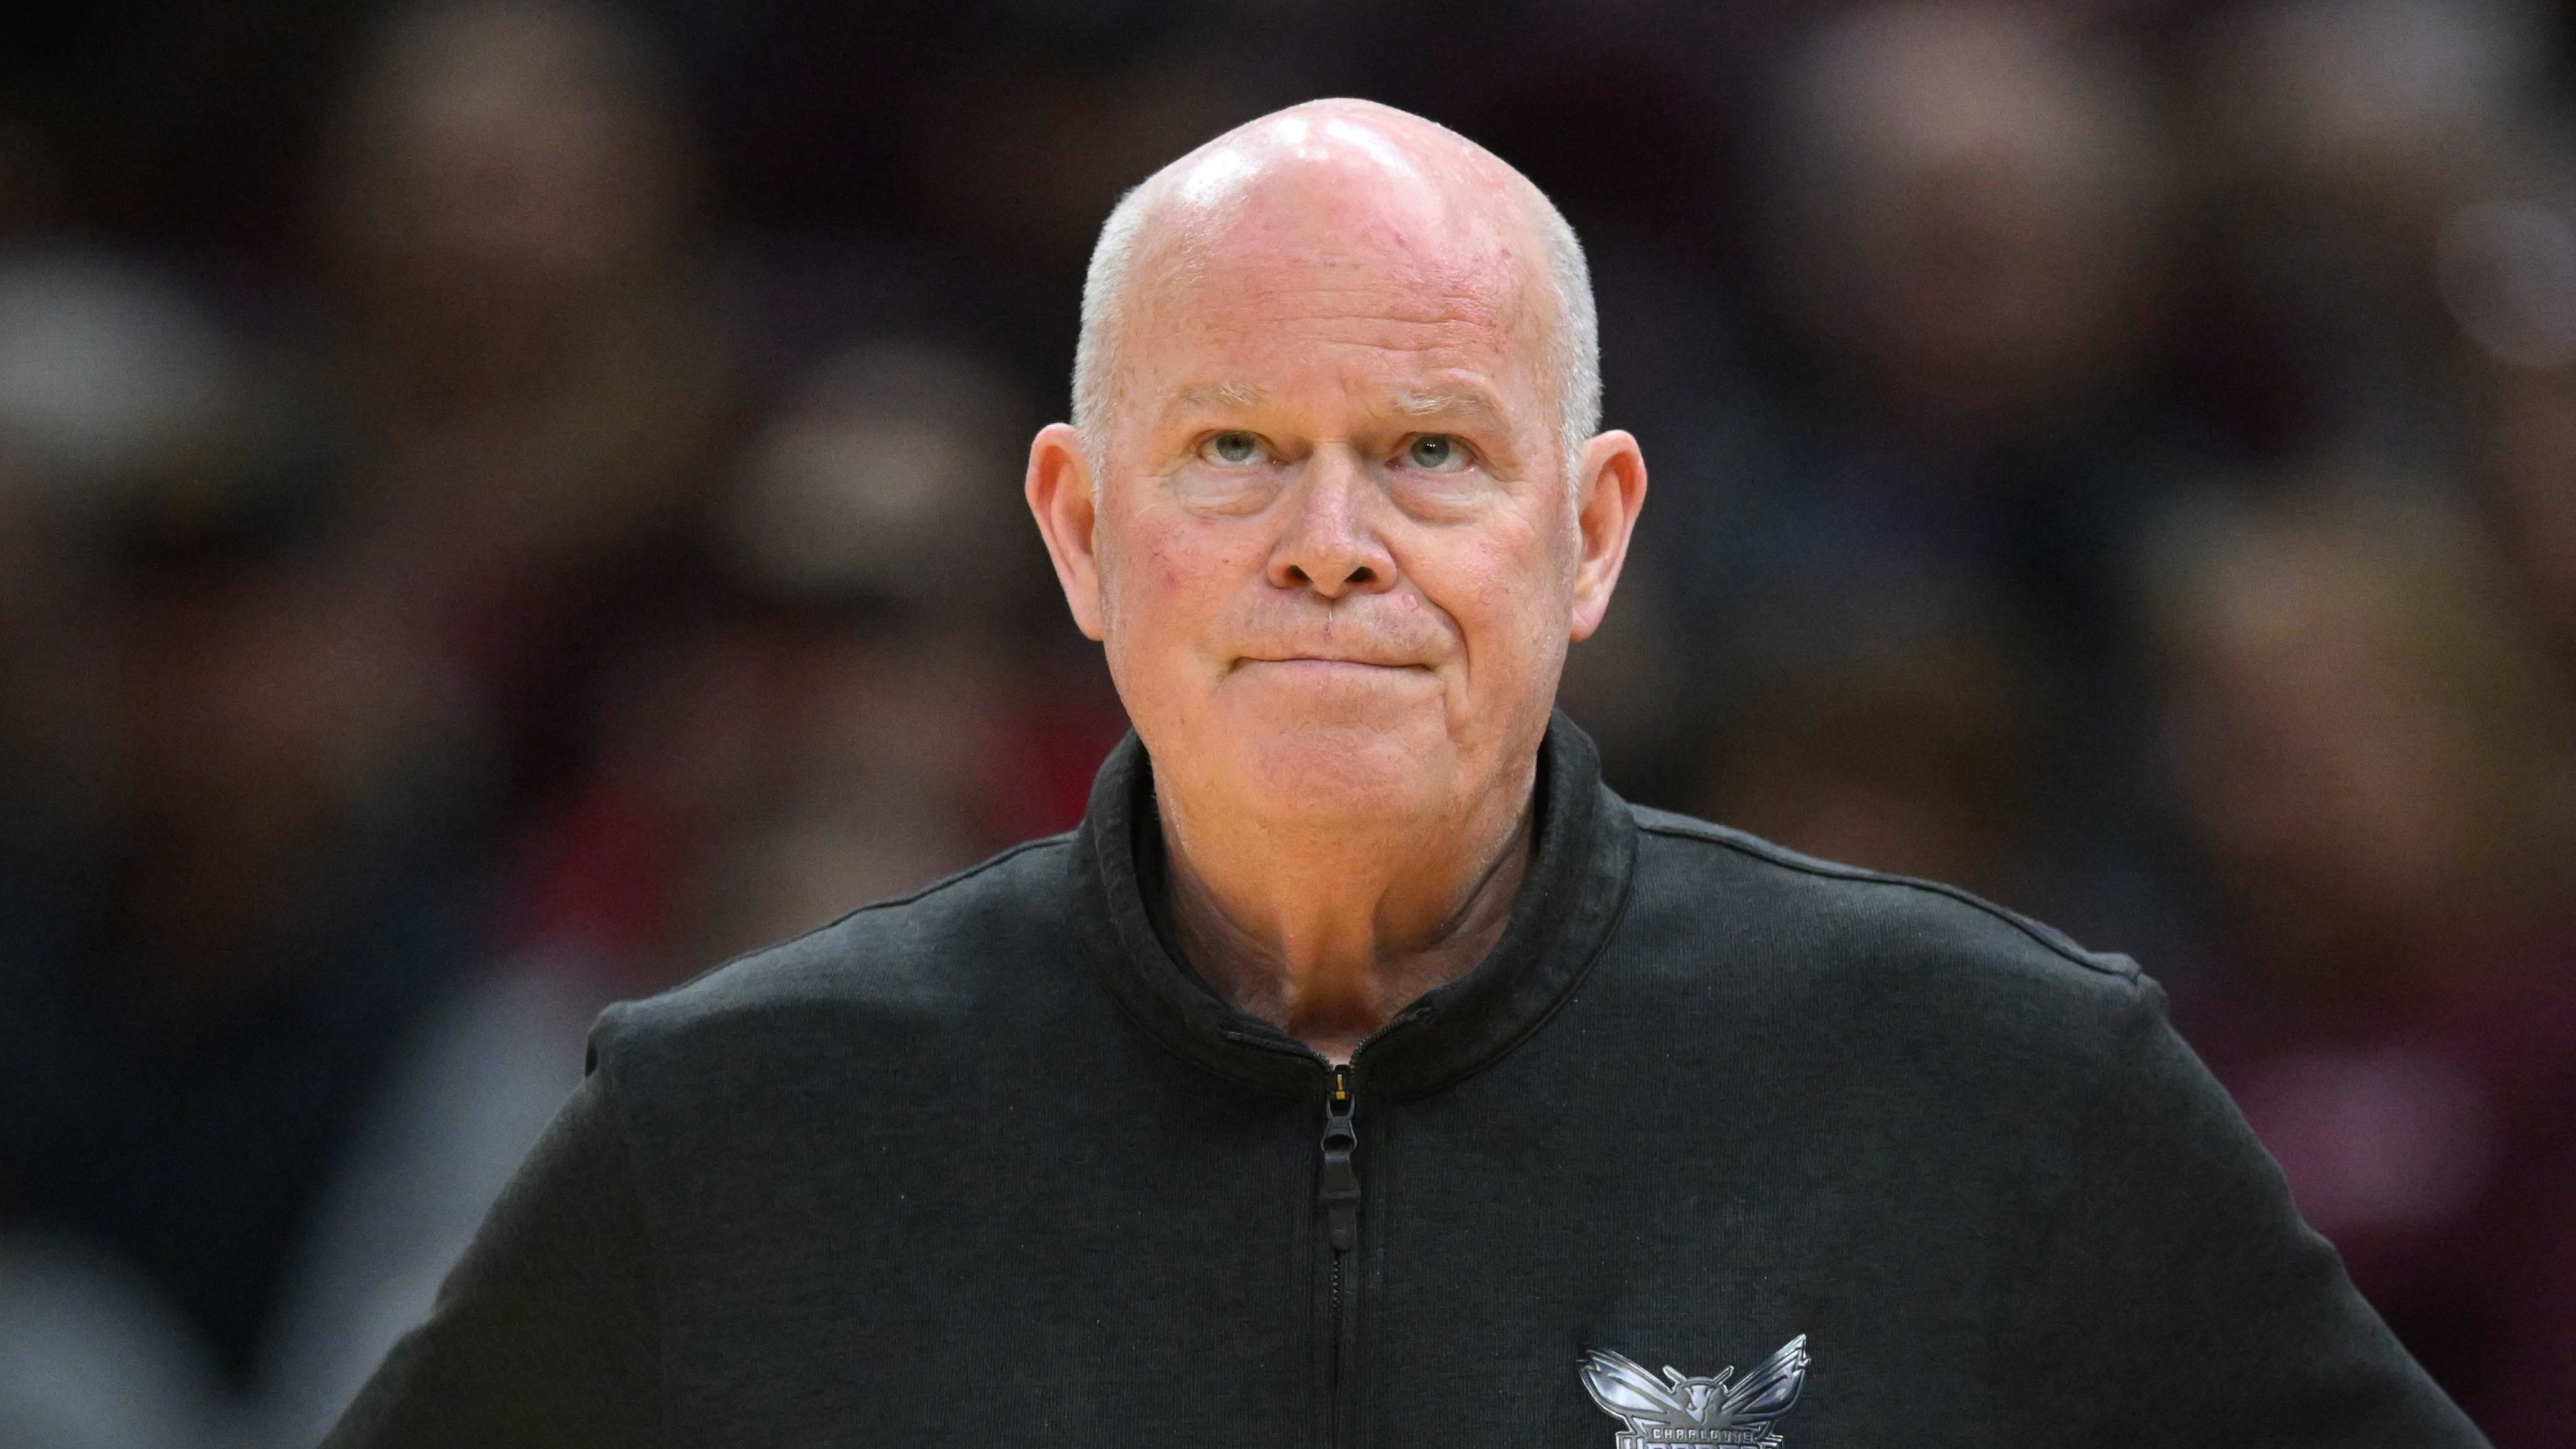 Steve Clifford’s Farewell: Hornets’ Future, LaMelo Ball’s Impact, and Coaching Transition